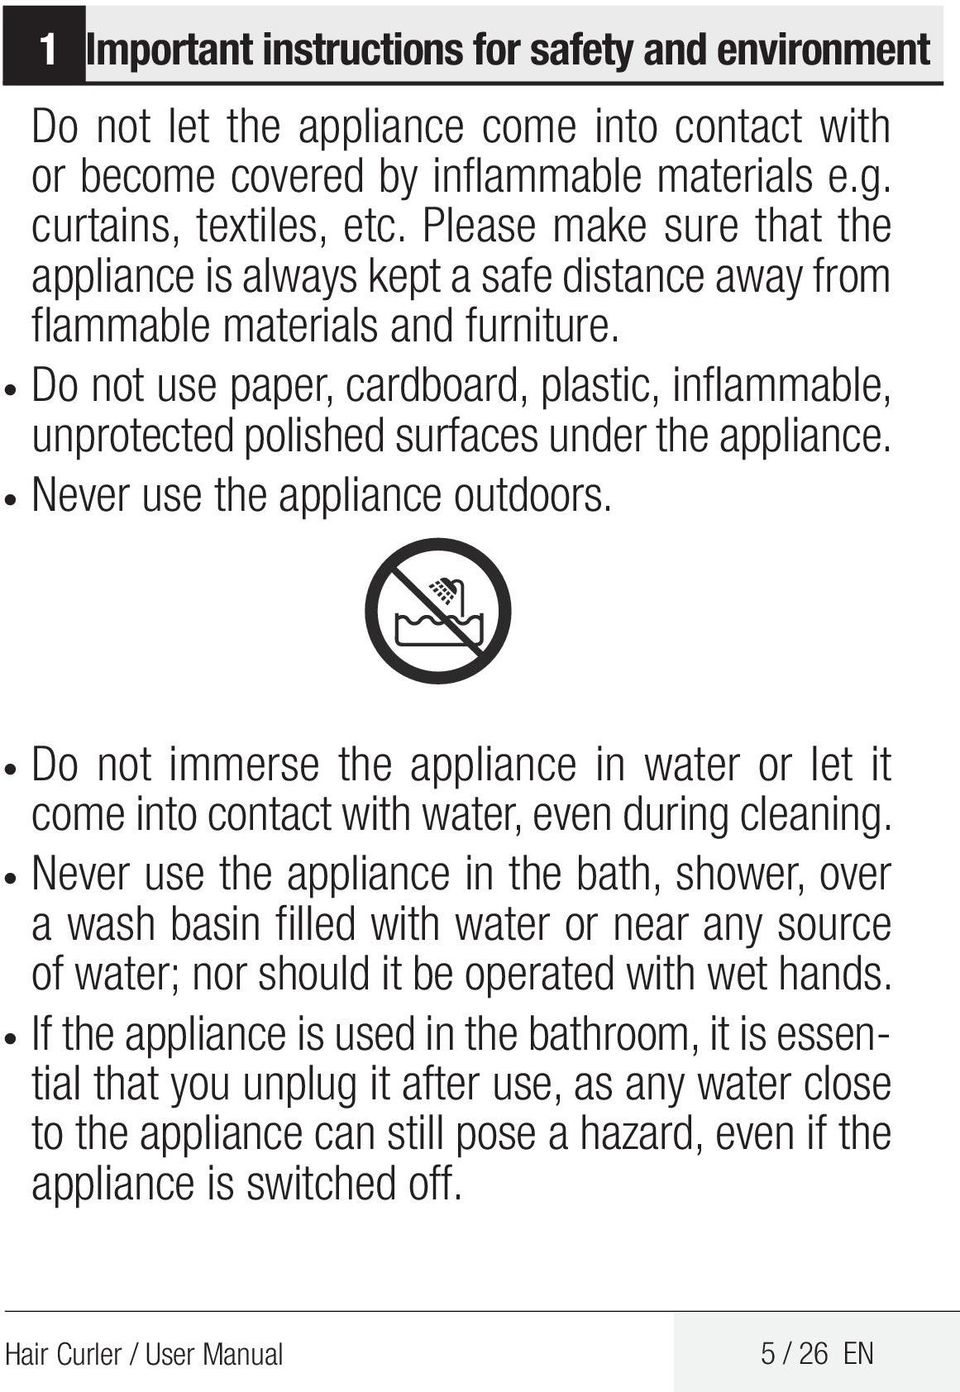 Do not use paper, cardboard, plastic, inflammable, unprotected polished surfaces under the appliance. Never use the appliance outdoors.